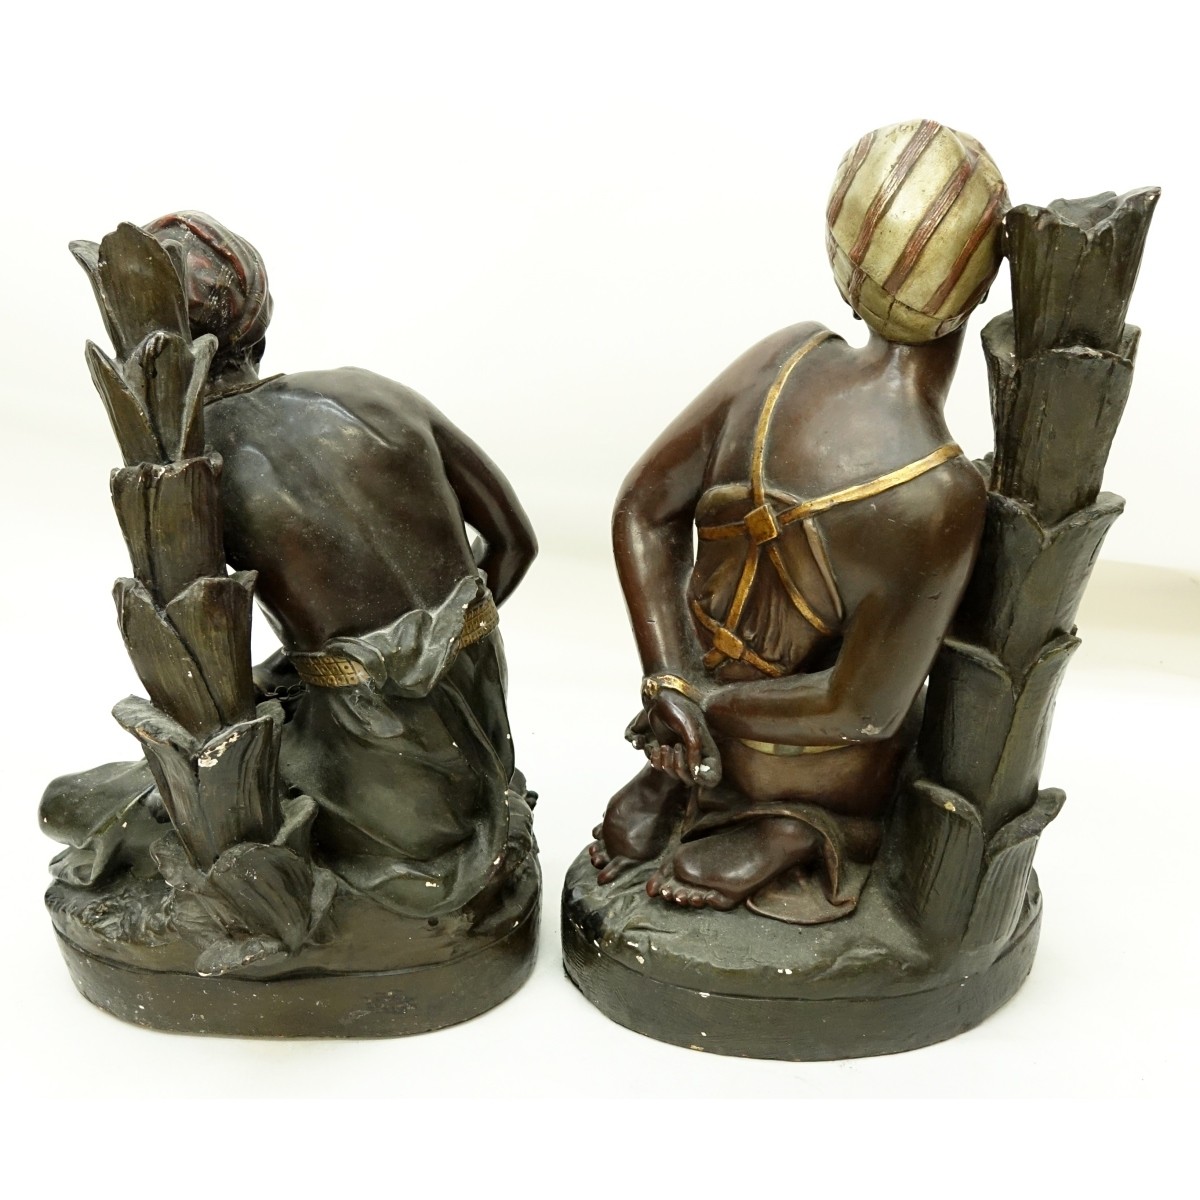 Pair of French Orientalist Slave Figures